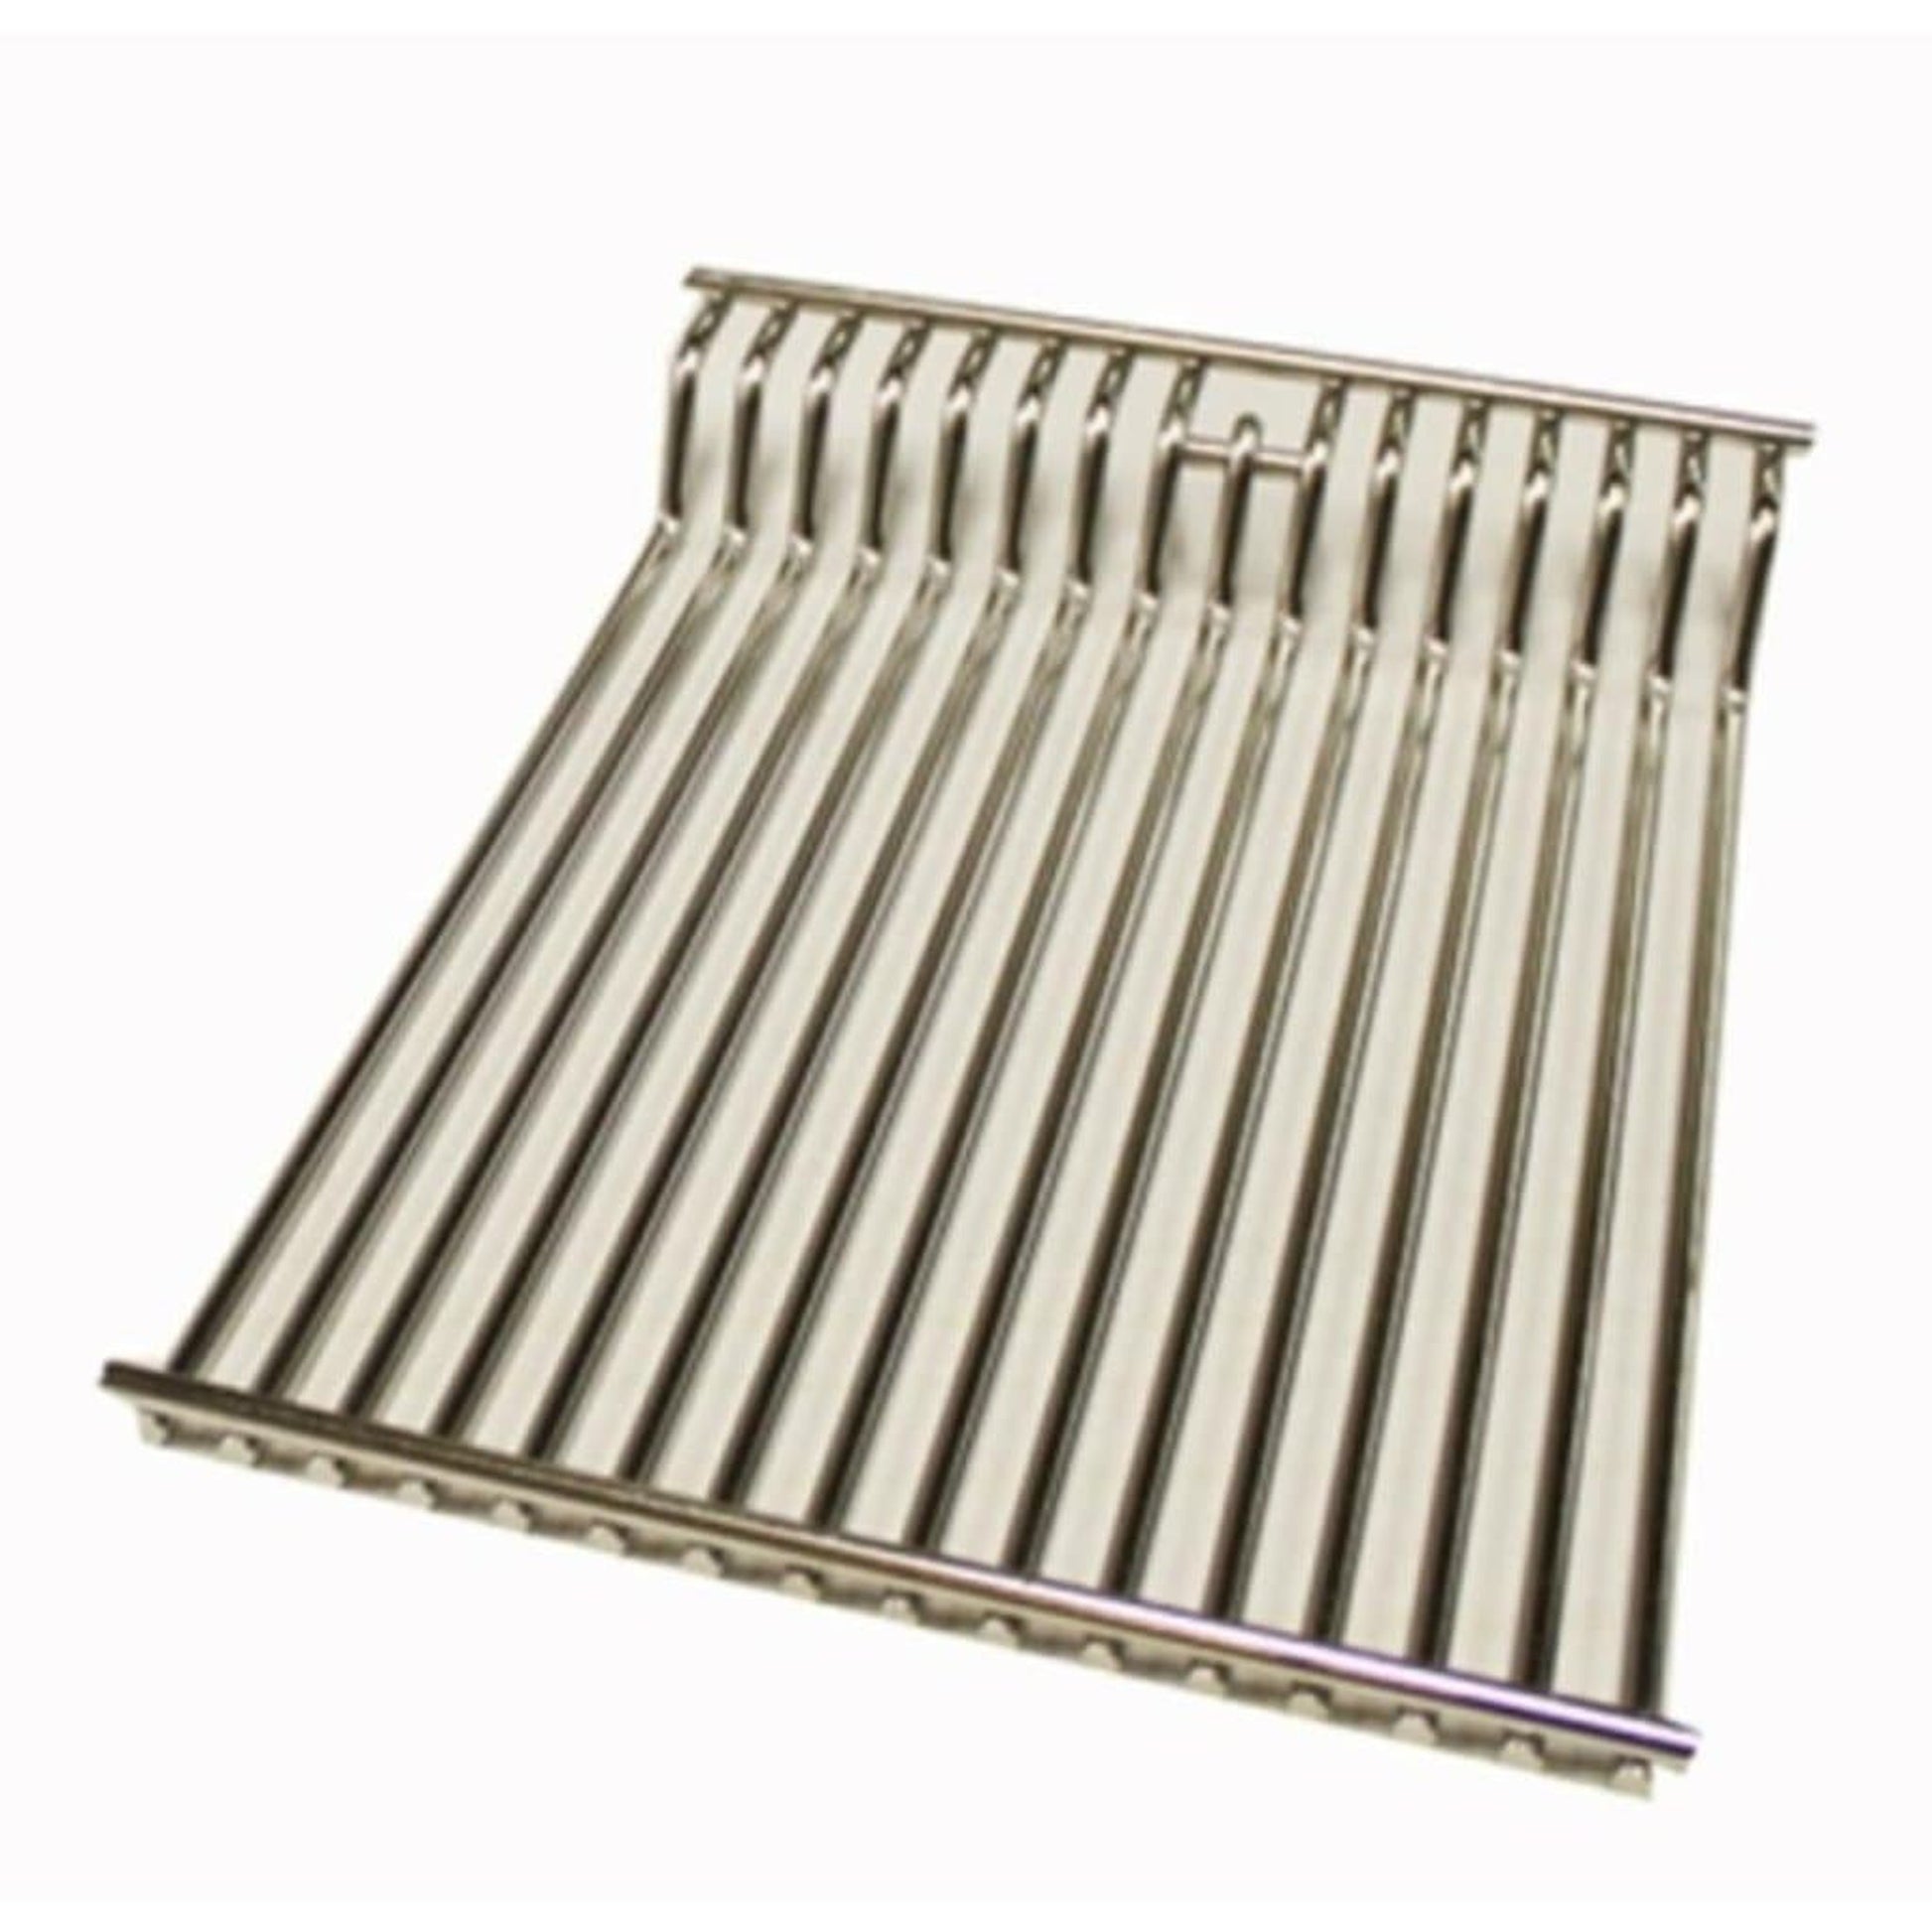 Broilmaster DPA119 Single Stainless Steel Rod Multi-Level Cooking Grids